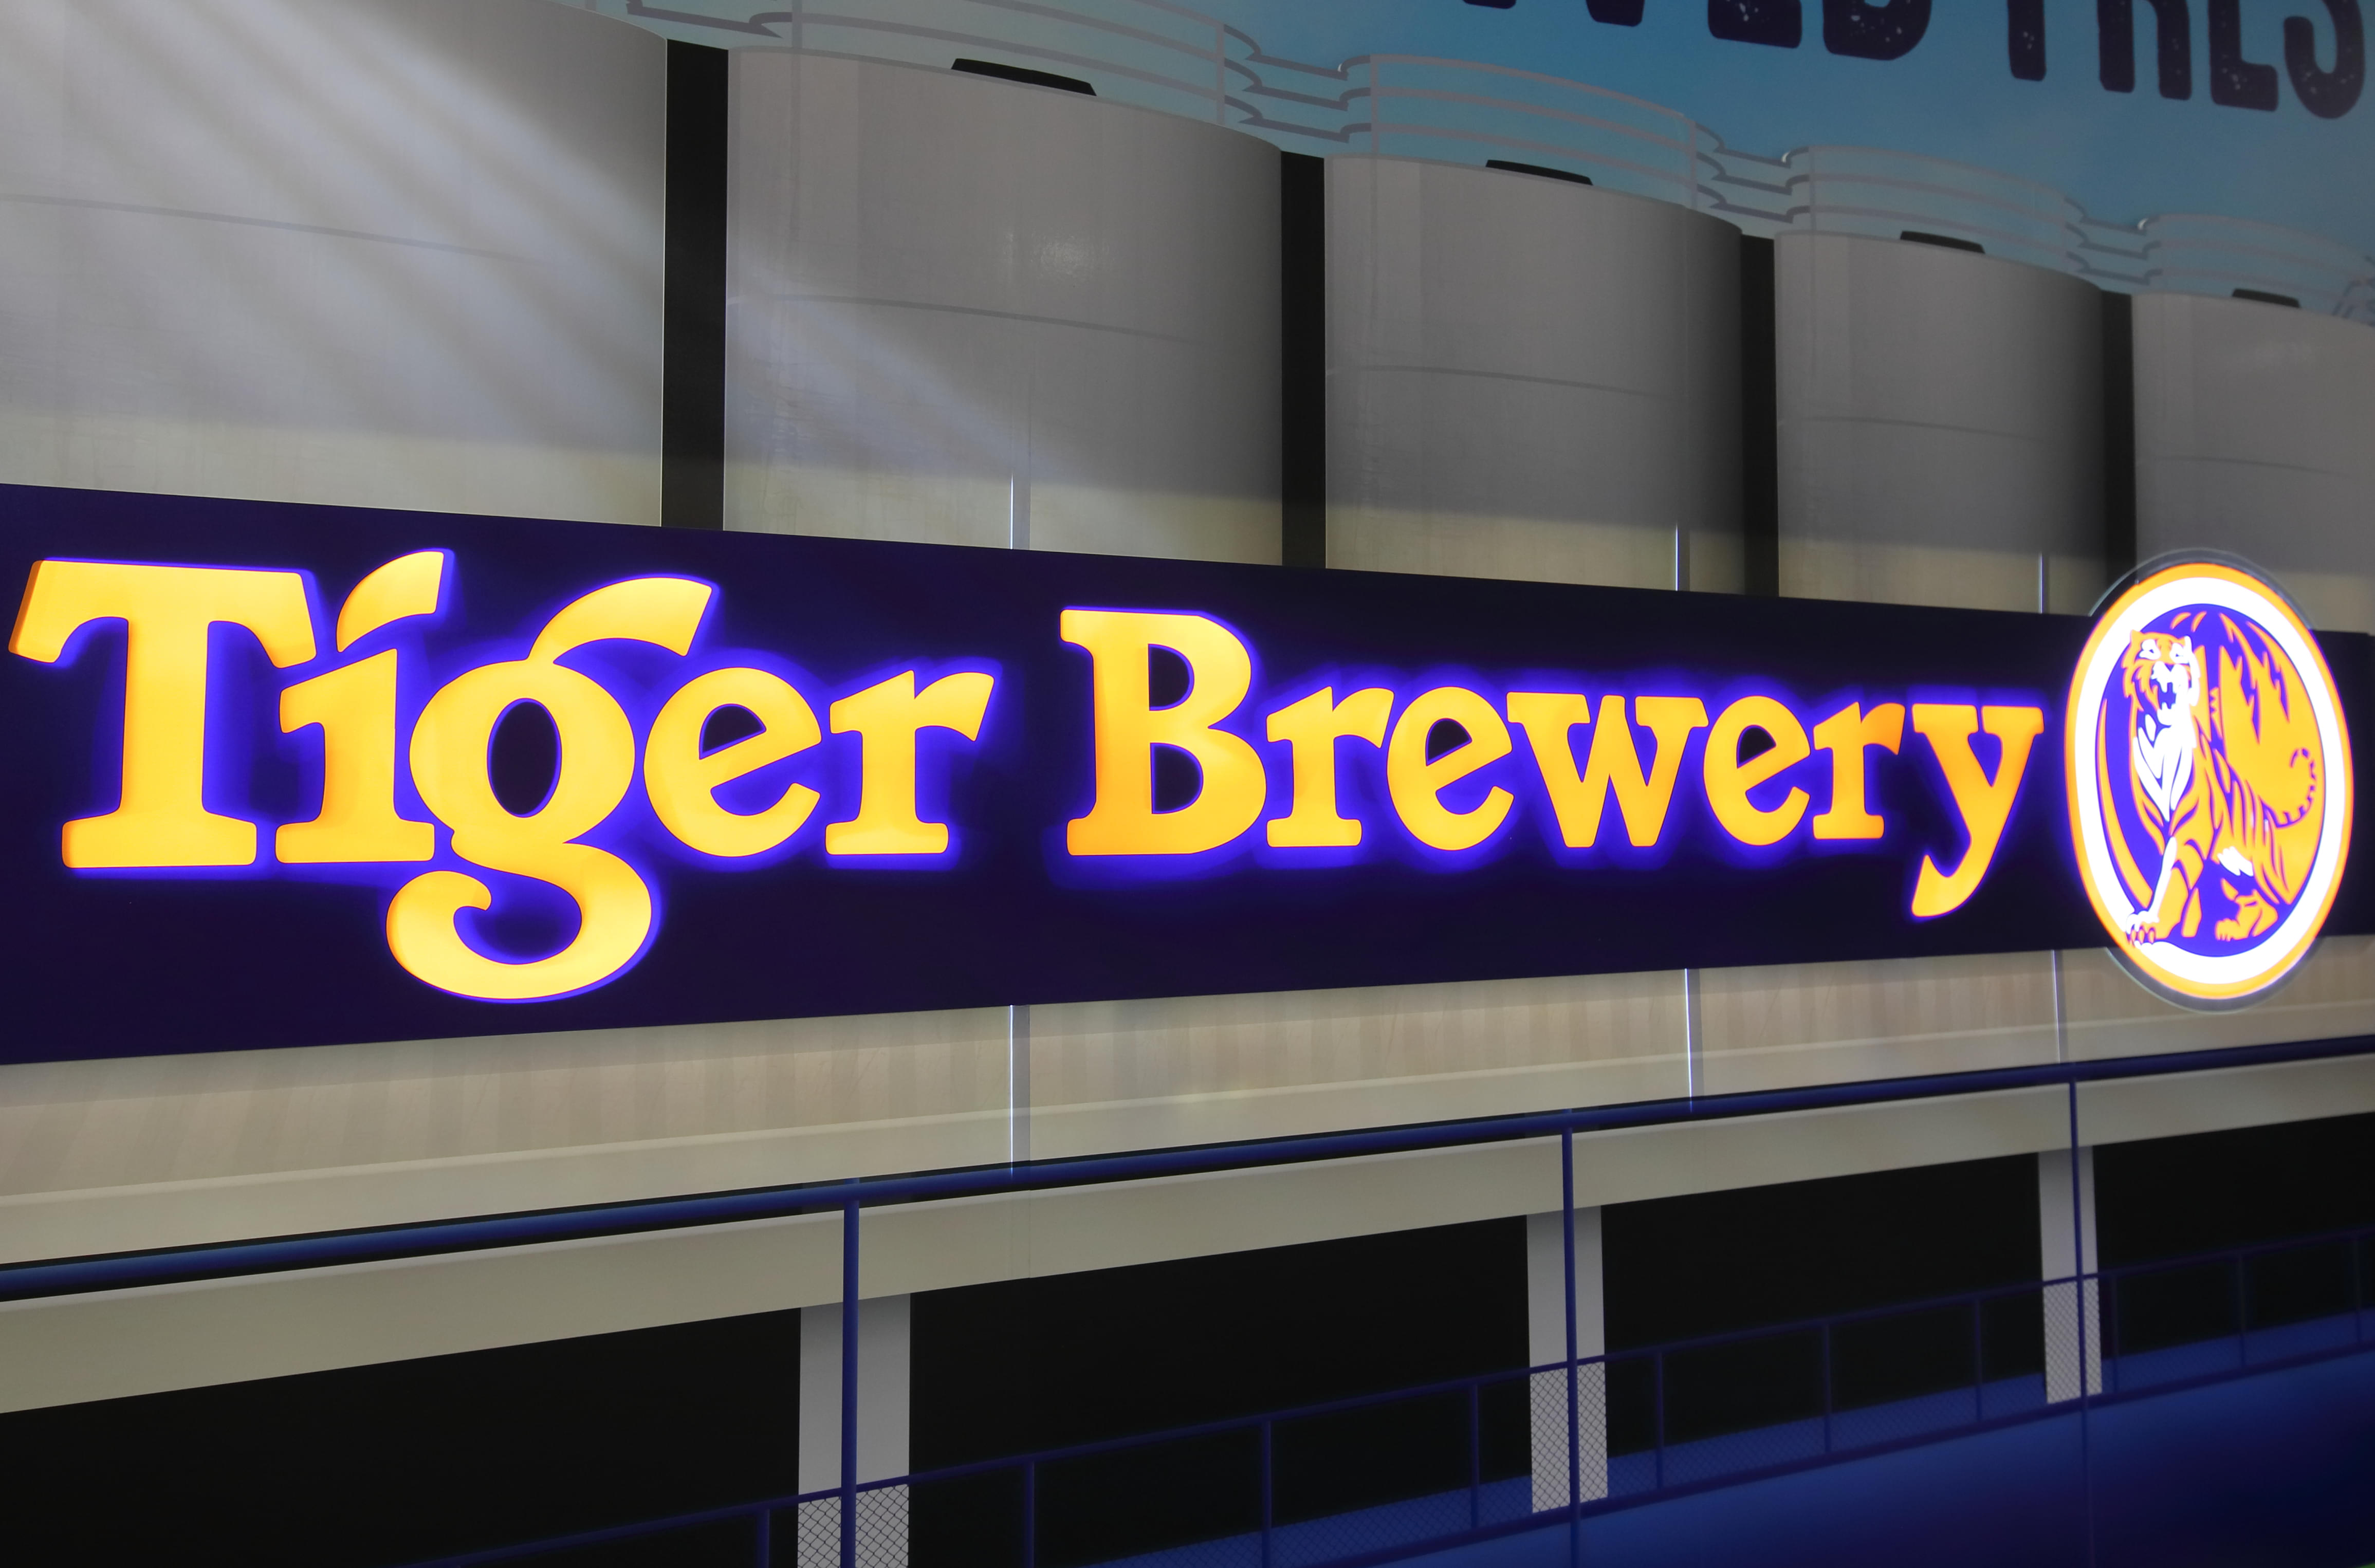 tiger brewery tour booking